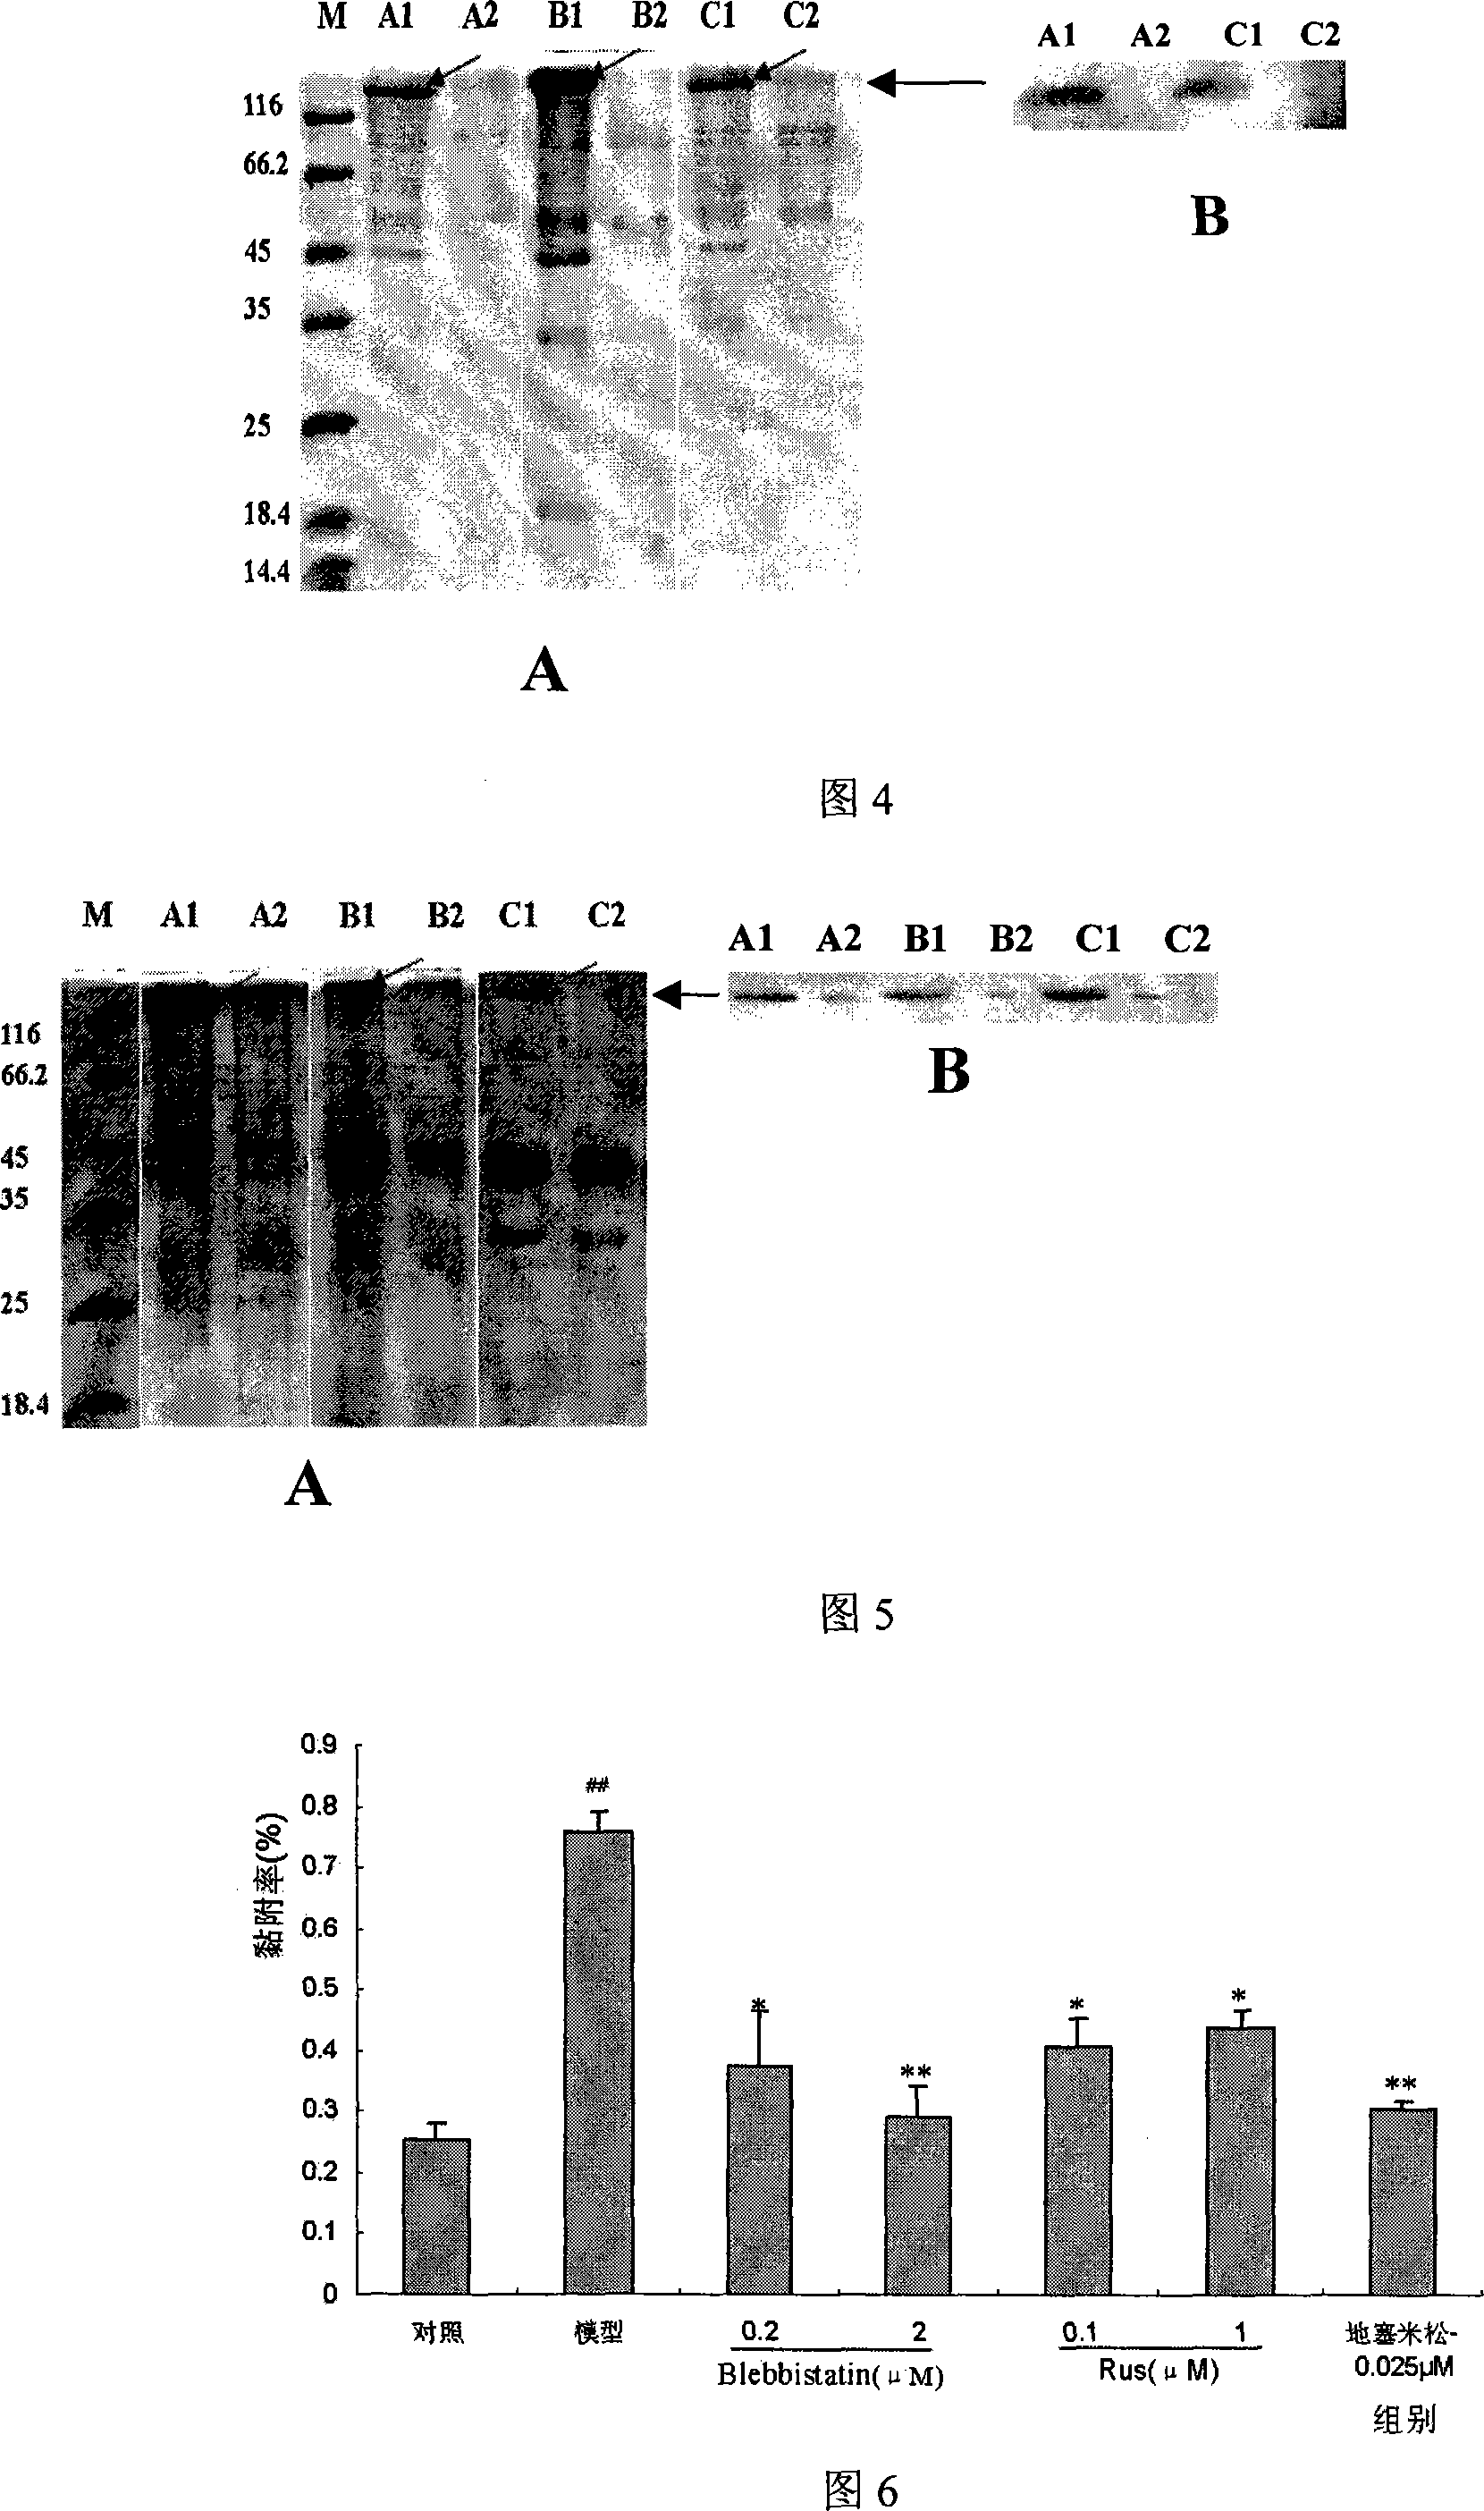 Medicine target for preventing and treating cardiovascular and cerebrovascular diseases associated with inflammation and its inhibitor